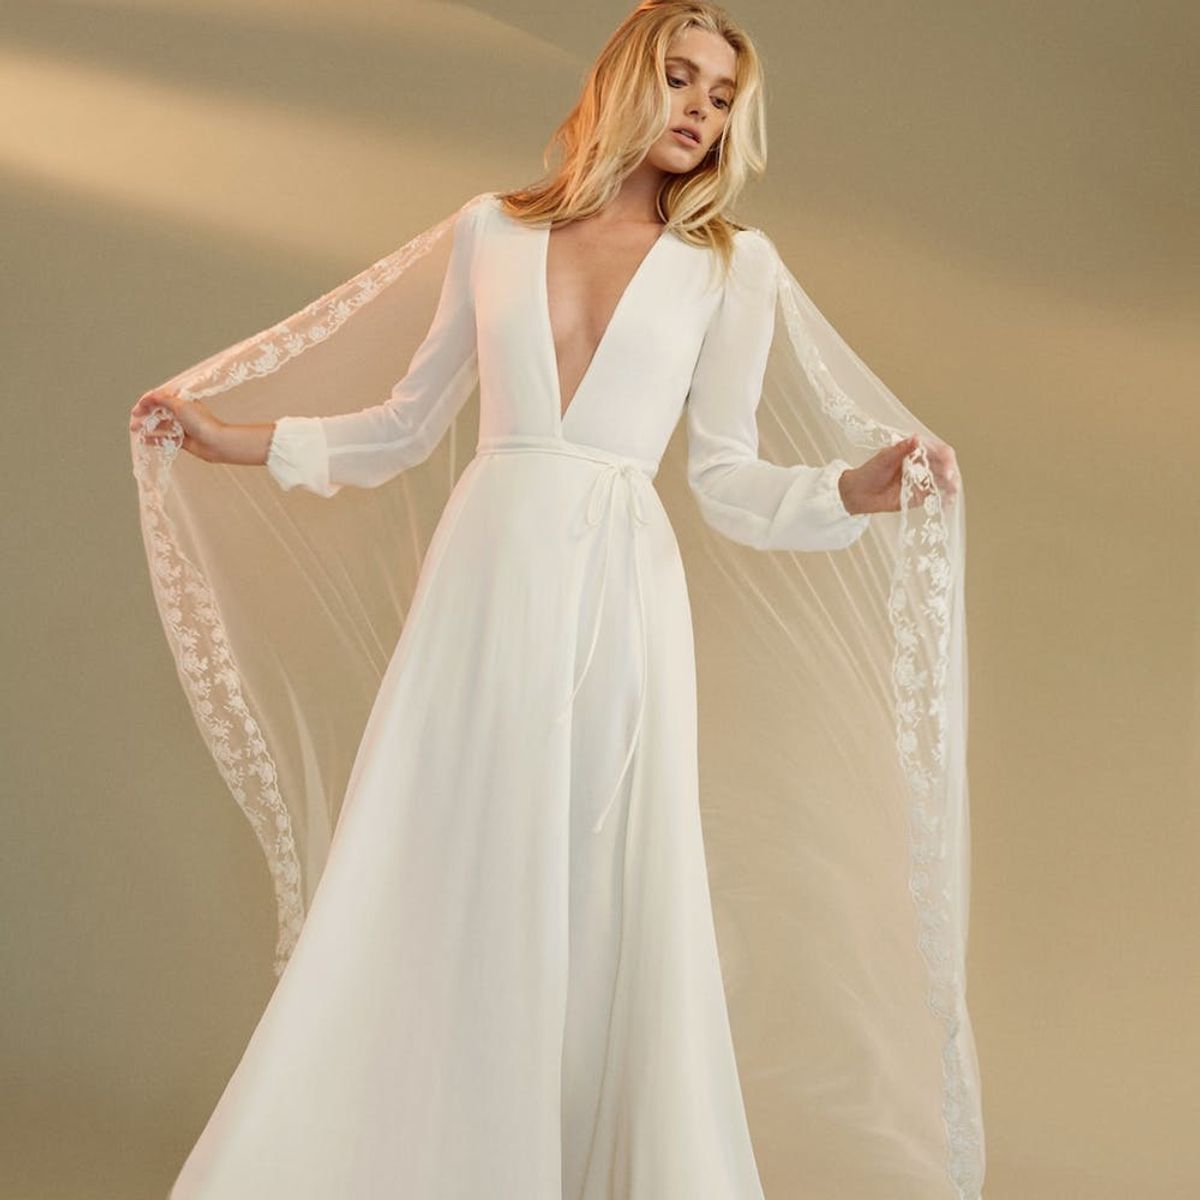 Prepare to Swoon HARD Over Reformation’s New Fall Bridal Collection